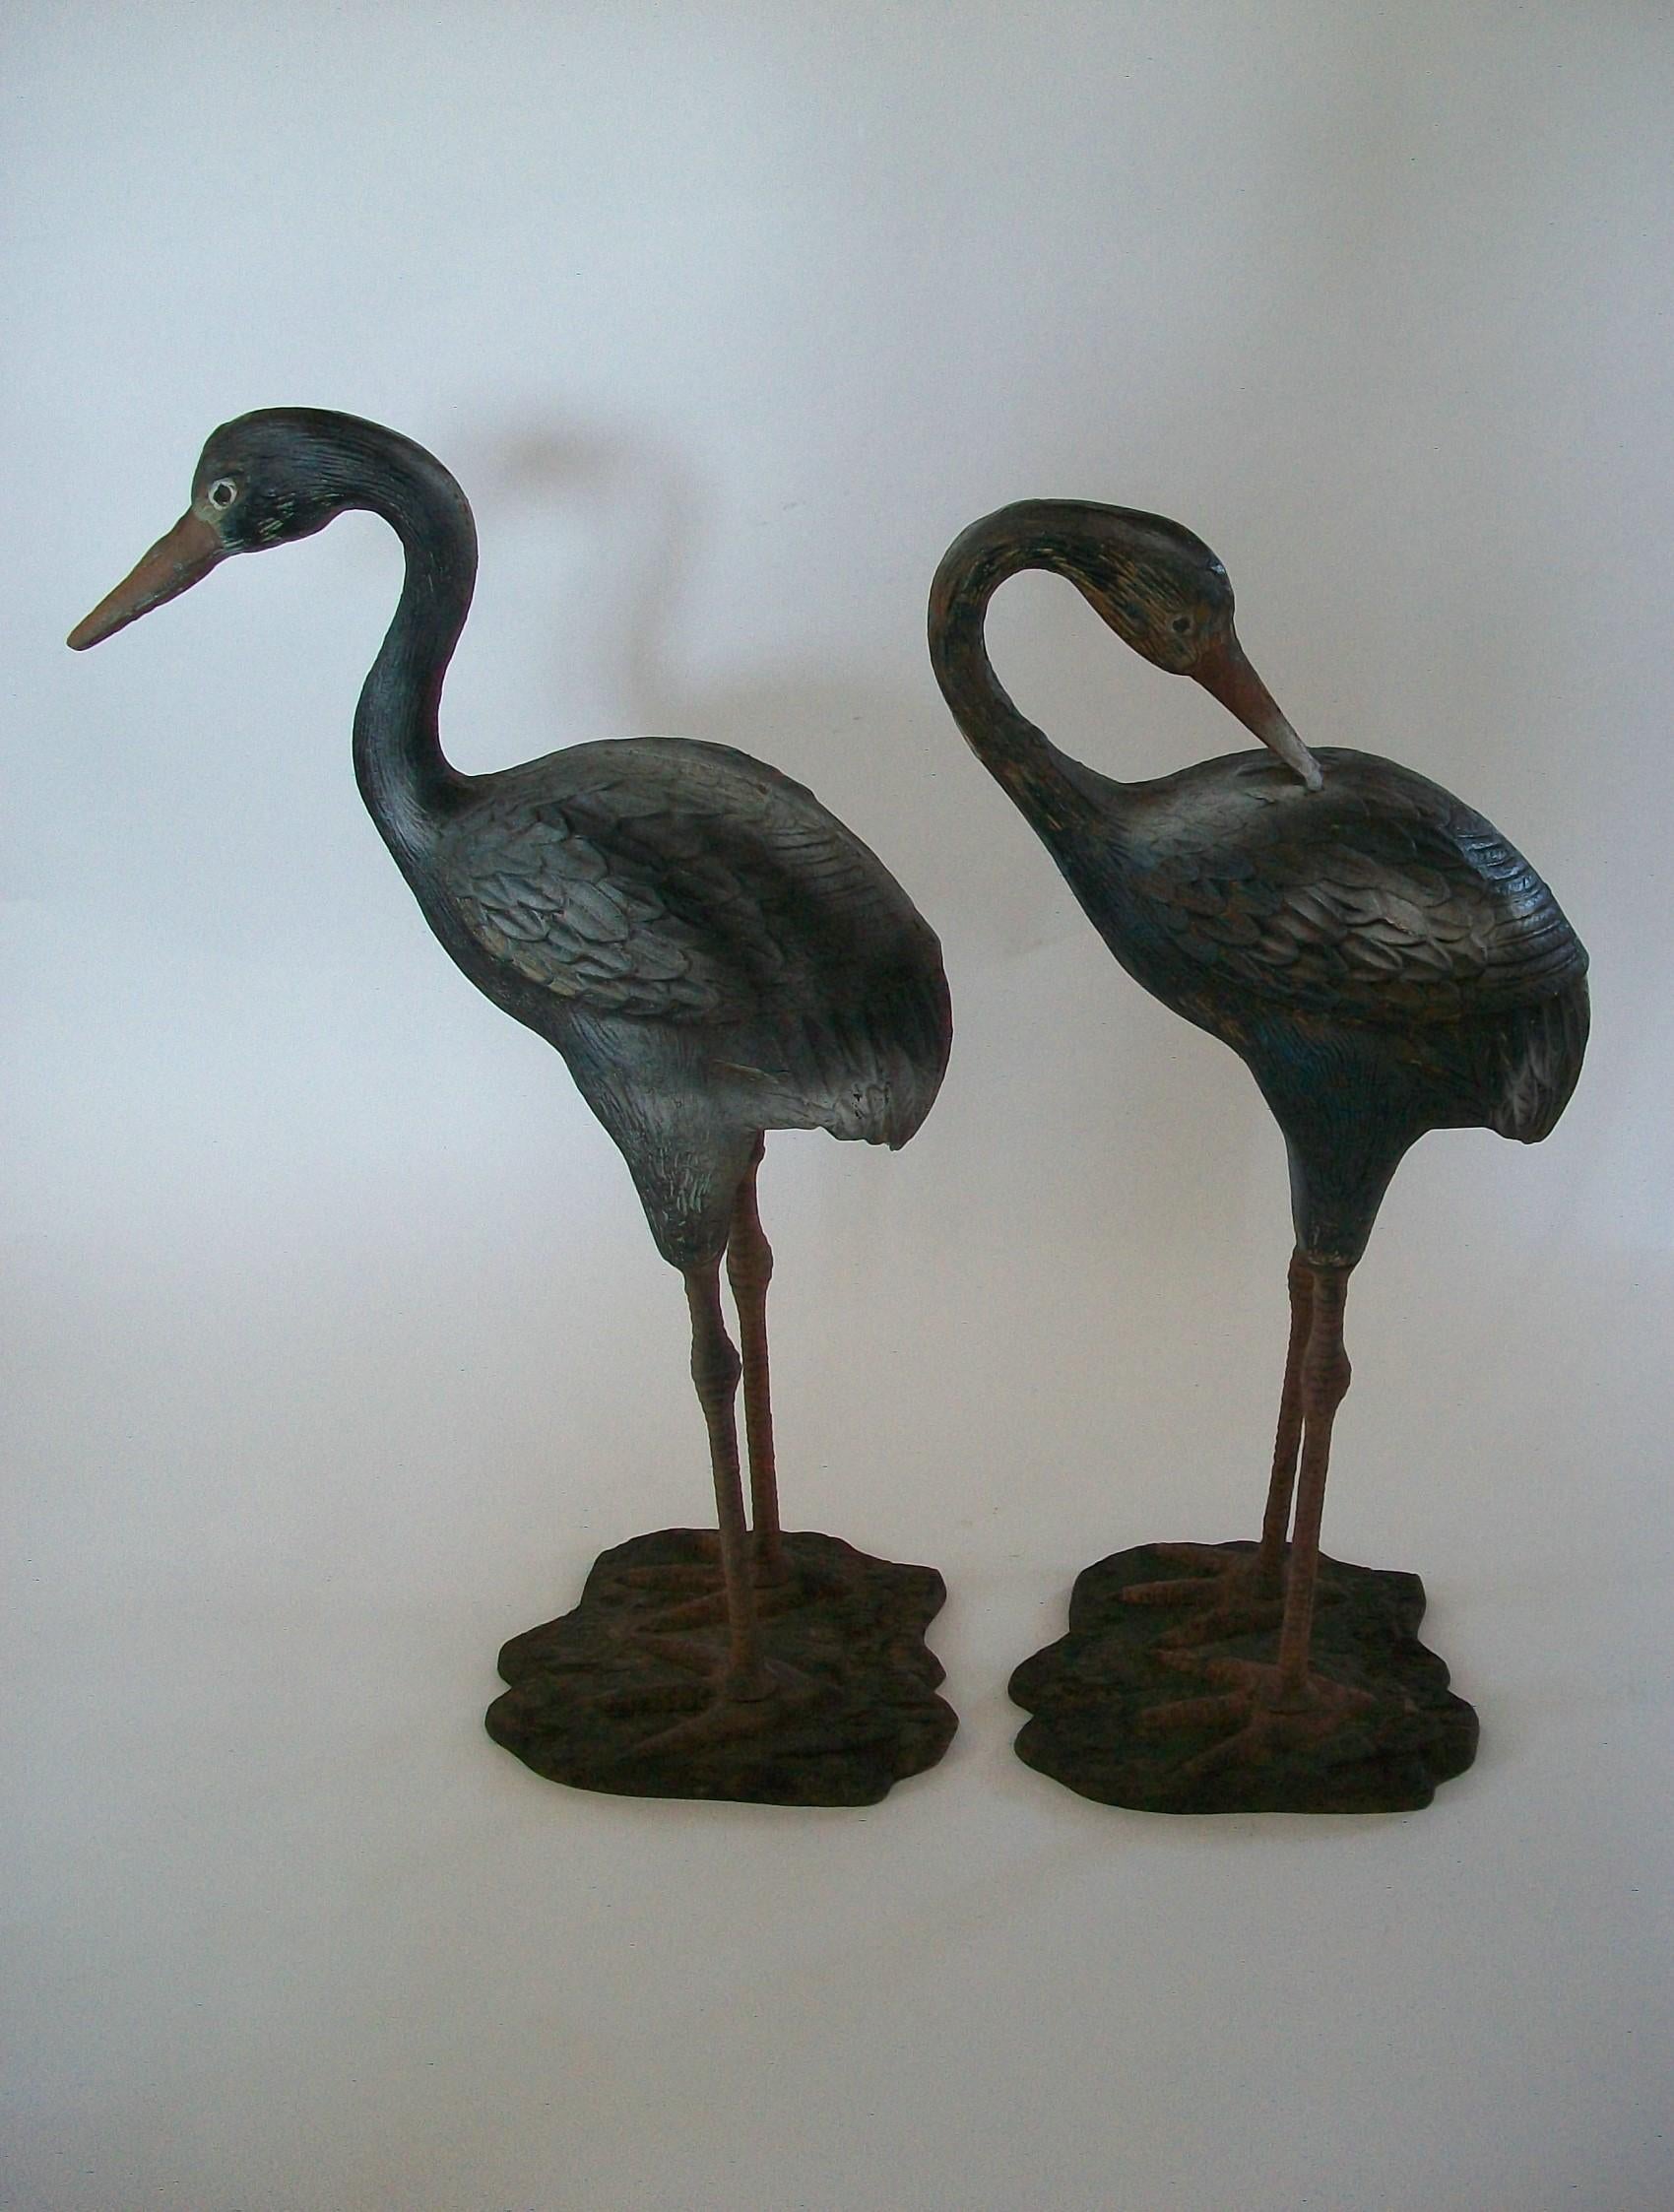 Hand-Crafted Pair of Painted Cast Iron Heron Garden Sculptures - France - circa 1930s For Sale